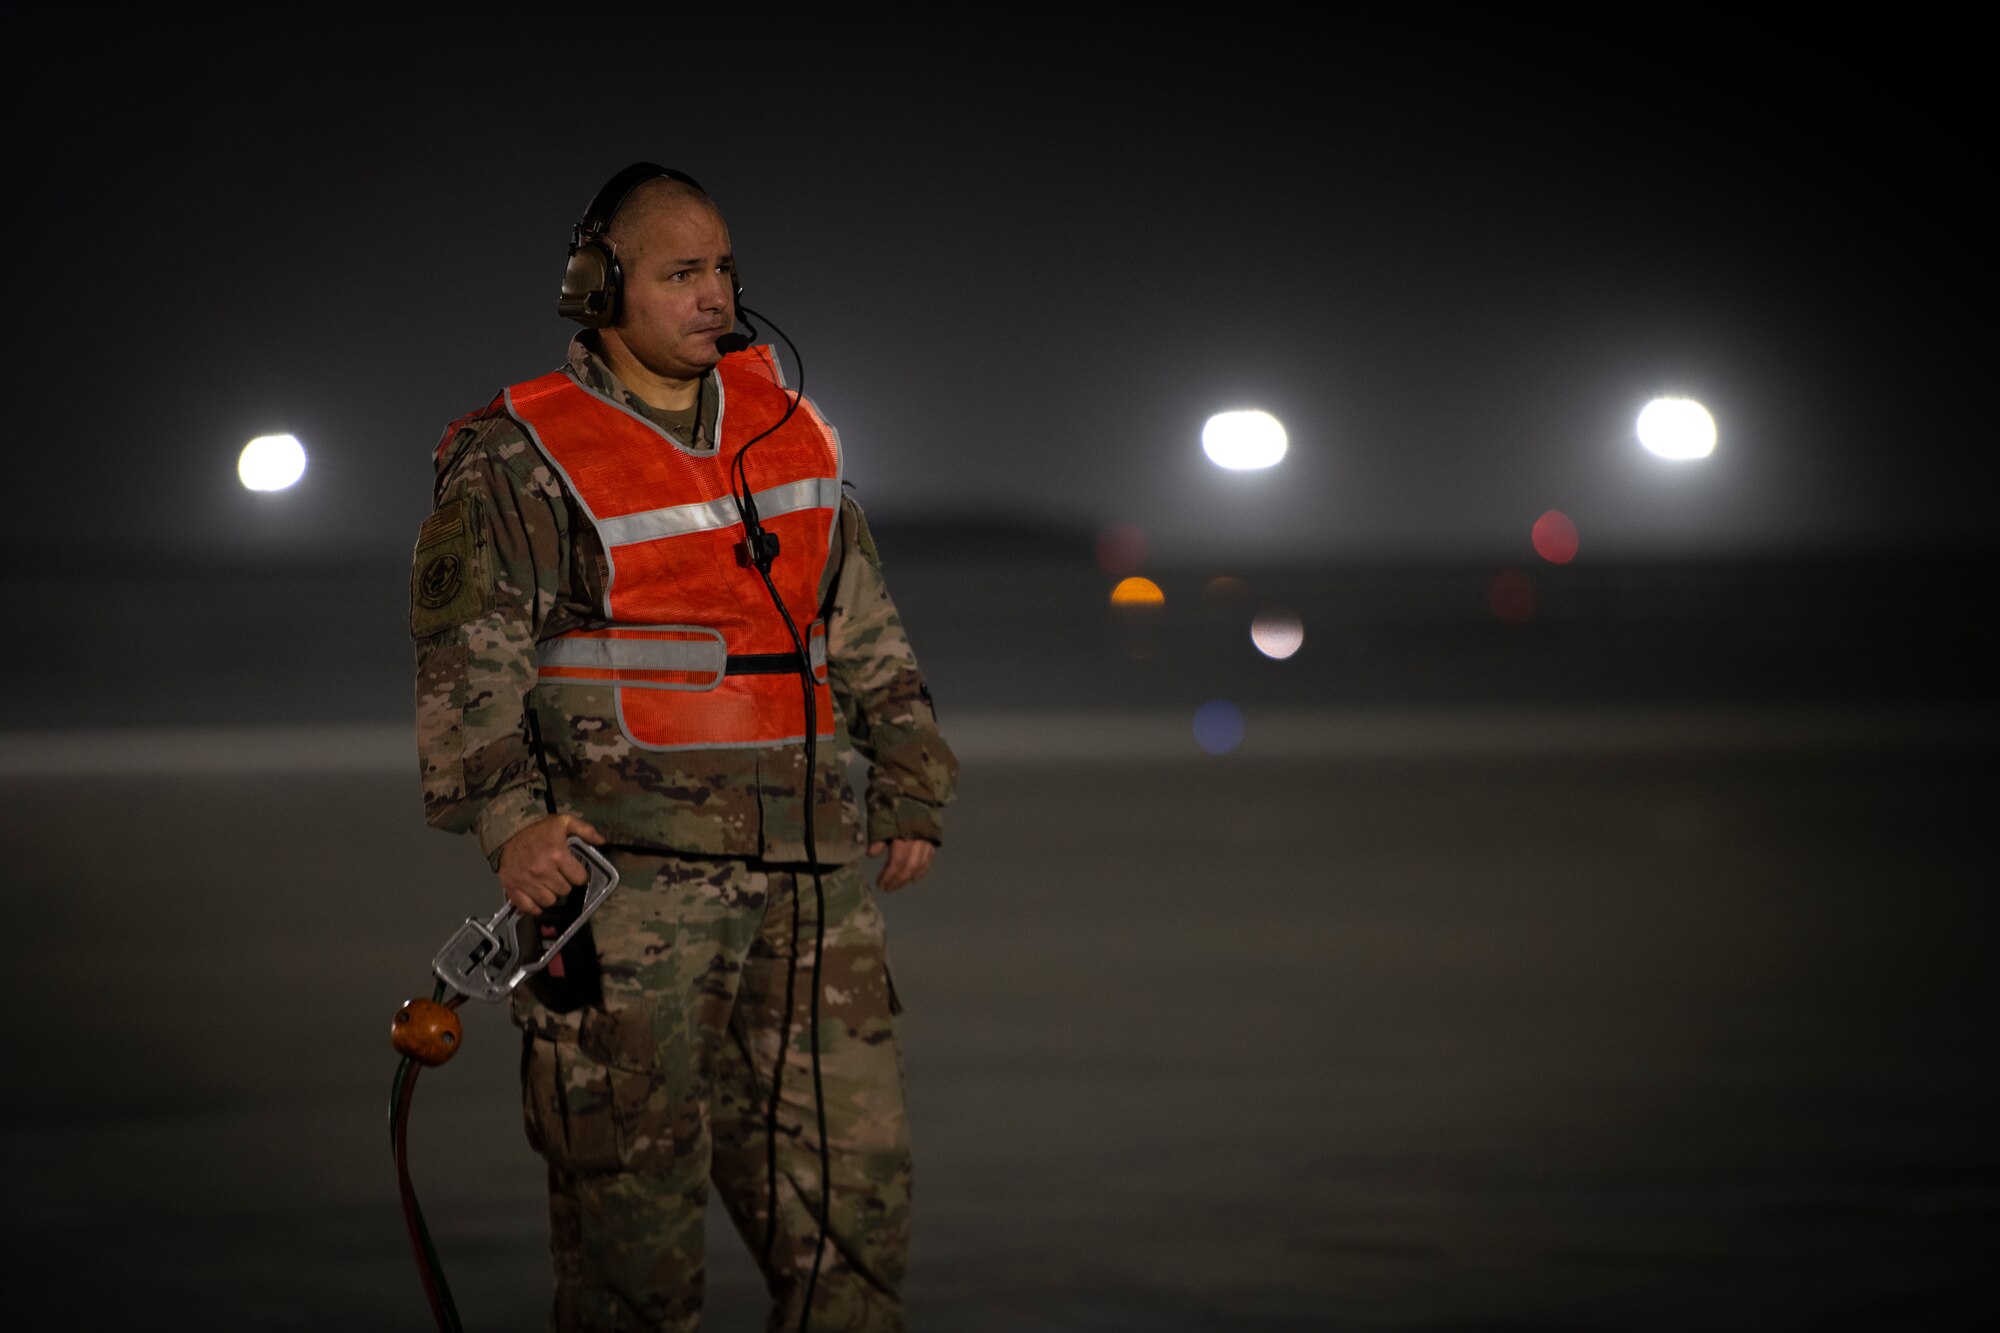 Military member watches plane be refueled while wearing a reflective safety vest.